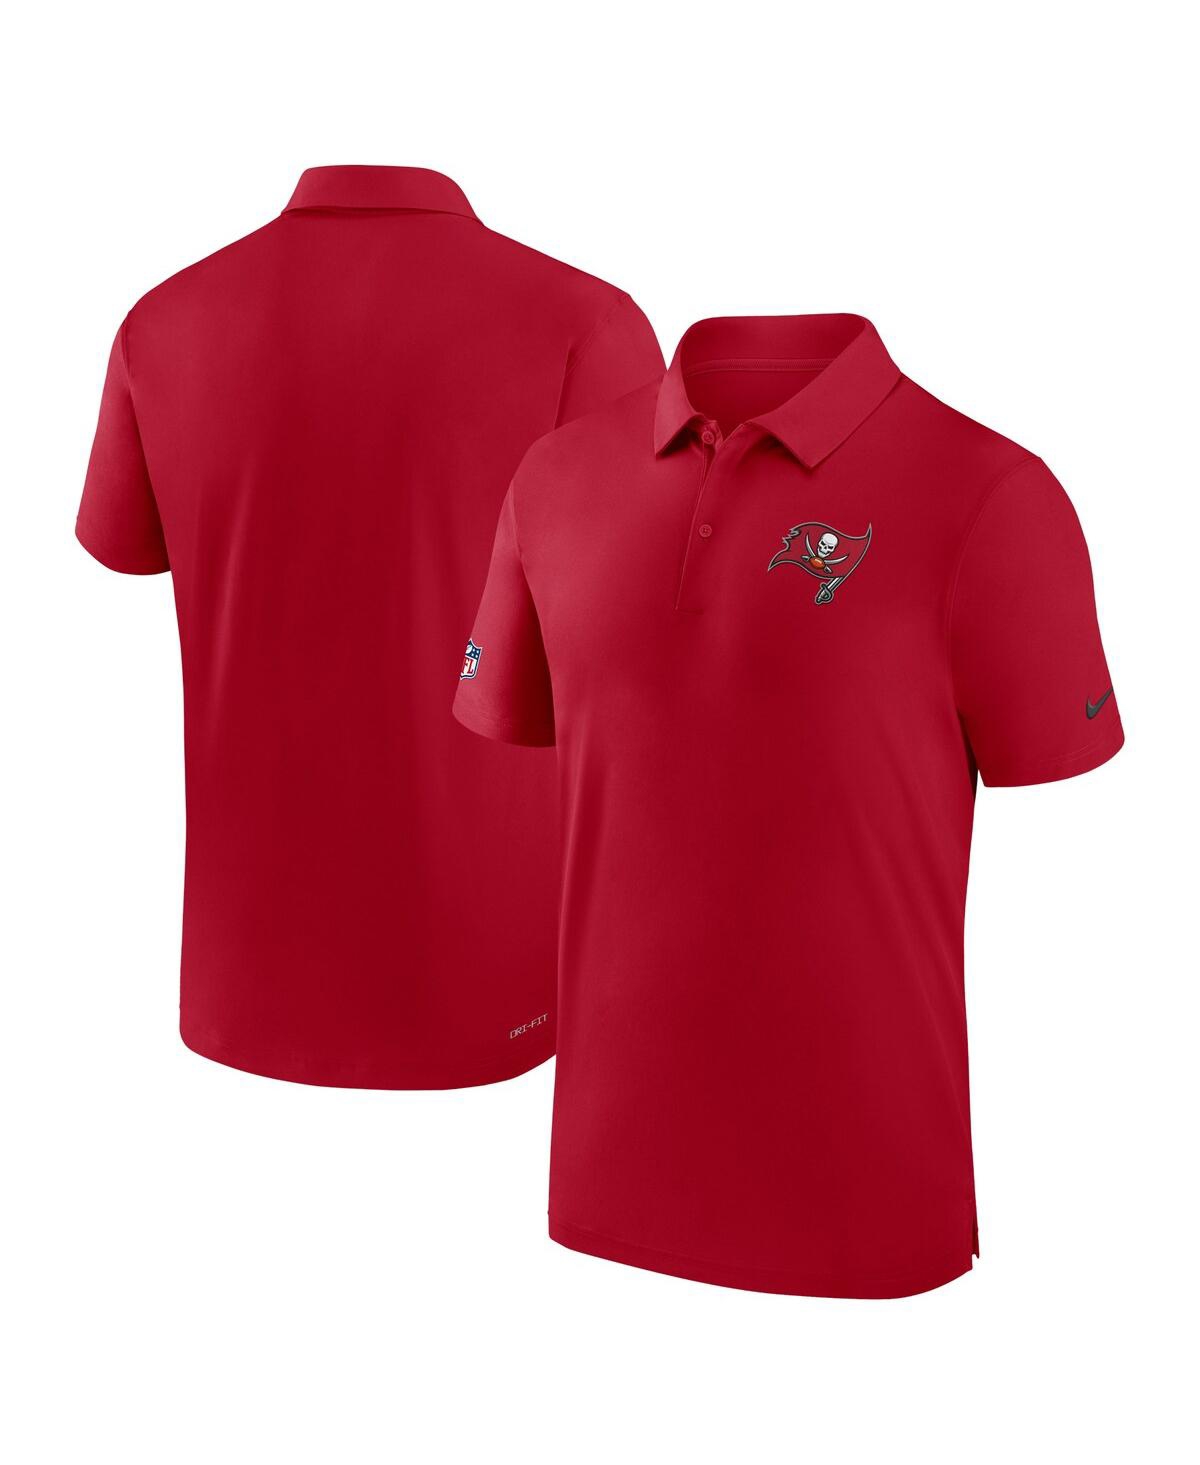 Nike Men's  Red Tampa Bay Buccaneers Sideline Coaches Performance Polo Shirt